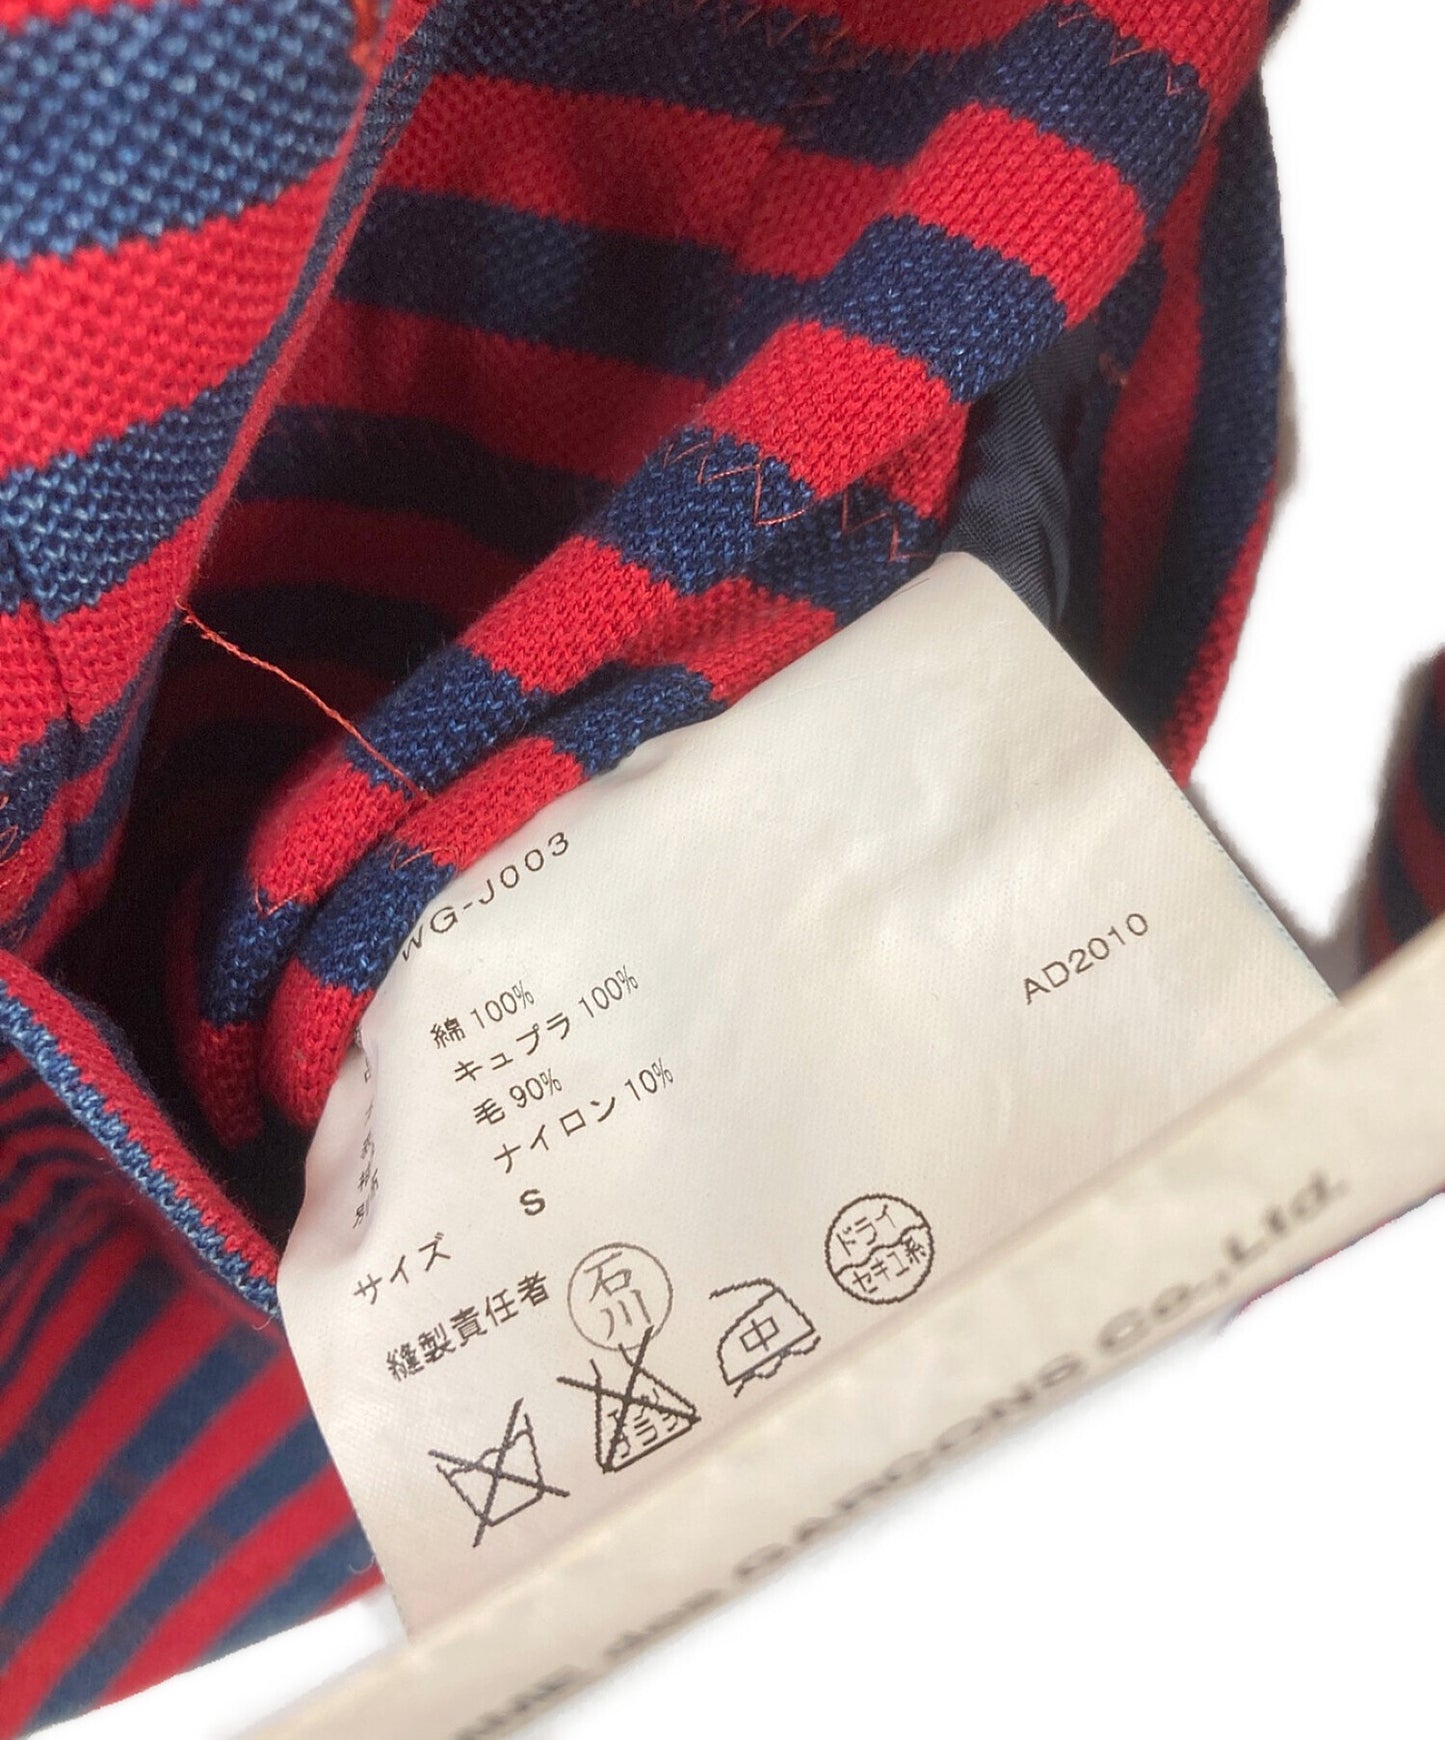 [Pre-owned] JUNYA WATANABE COMME des GARCONS  AD2010 Elbow patch striped jacket WG-J003